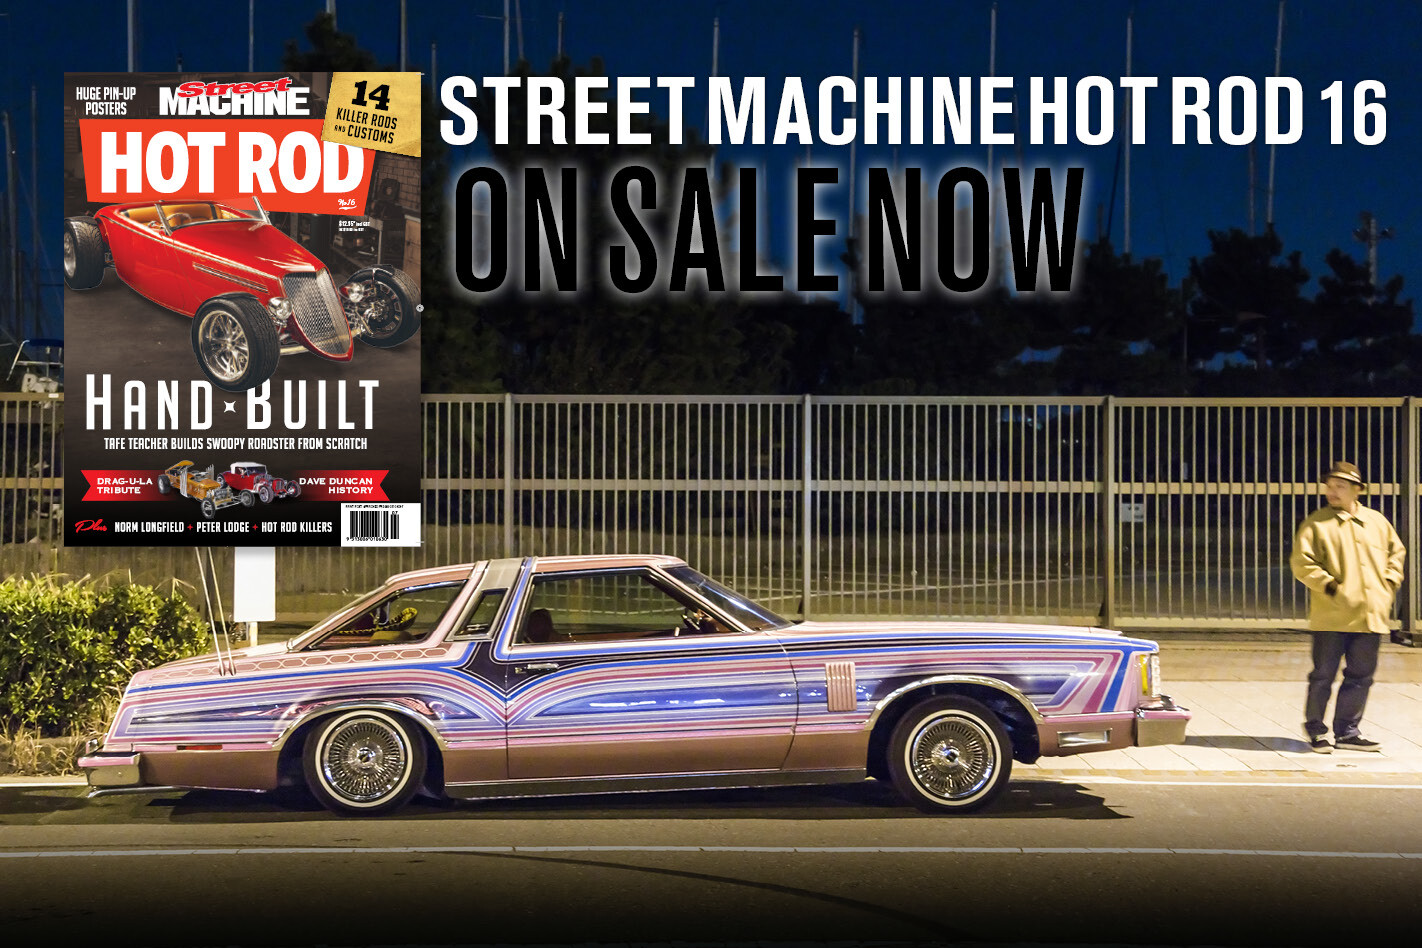 VIDEO: STREET MACHINE HOT ROD 16 PREVIEW